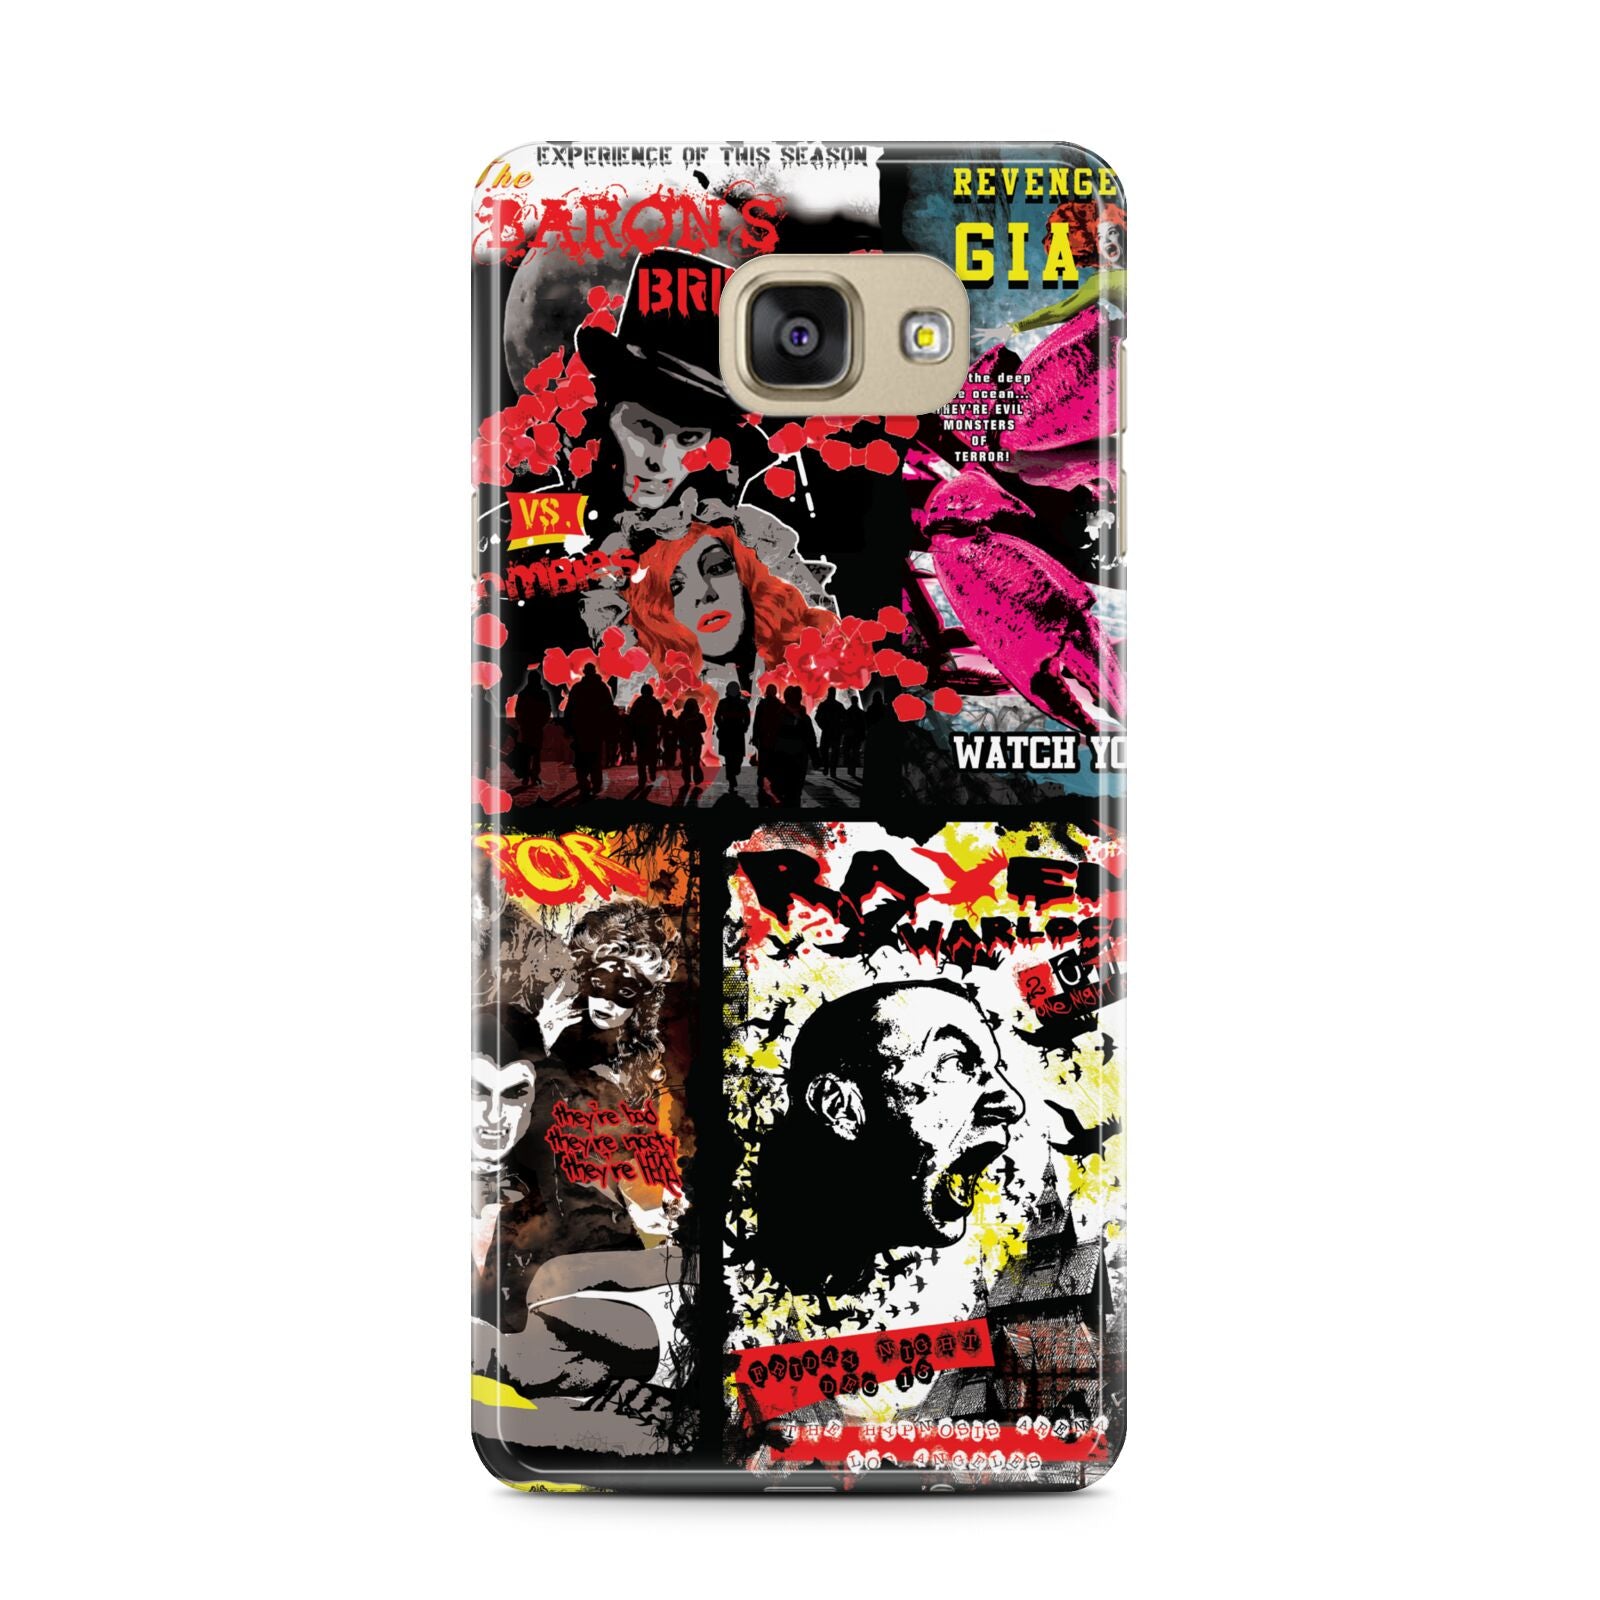 B Movie Posters Samsung Galaxy A7 2016 Case on gold phone